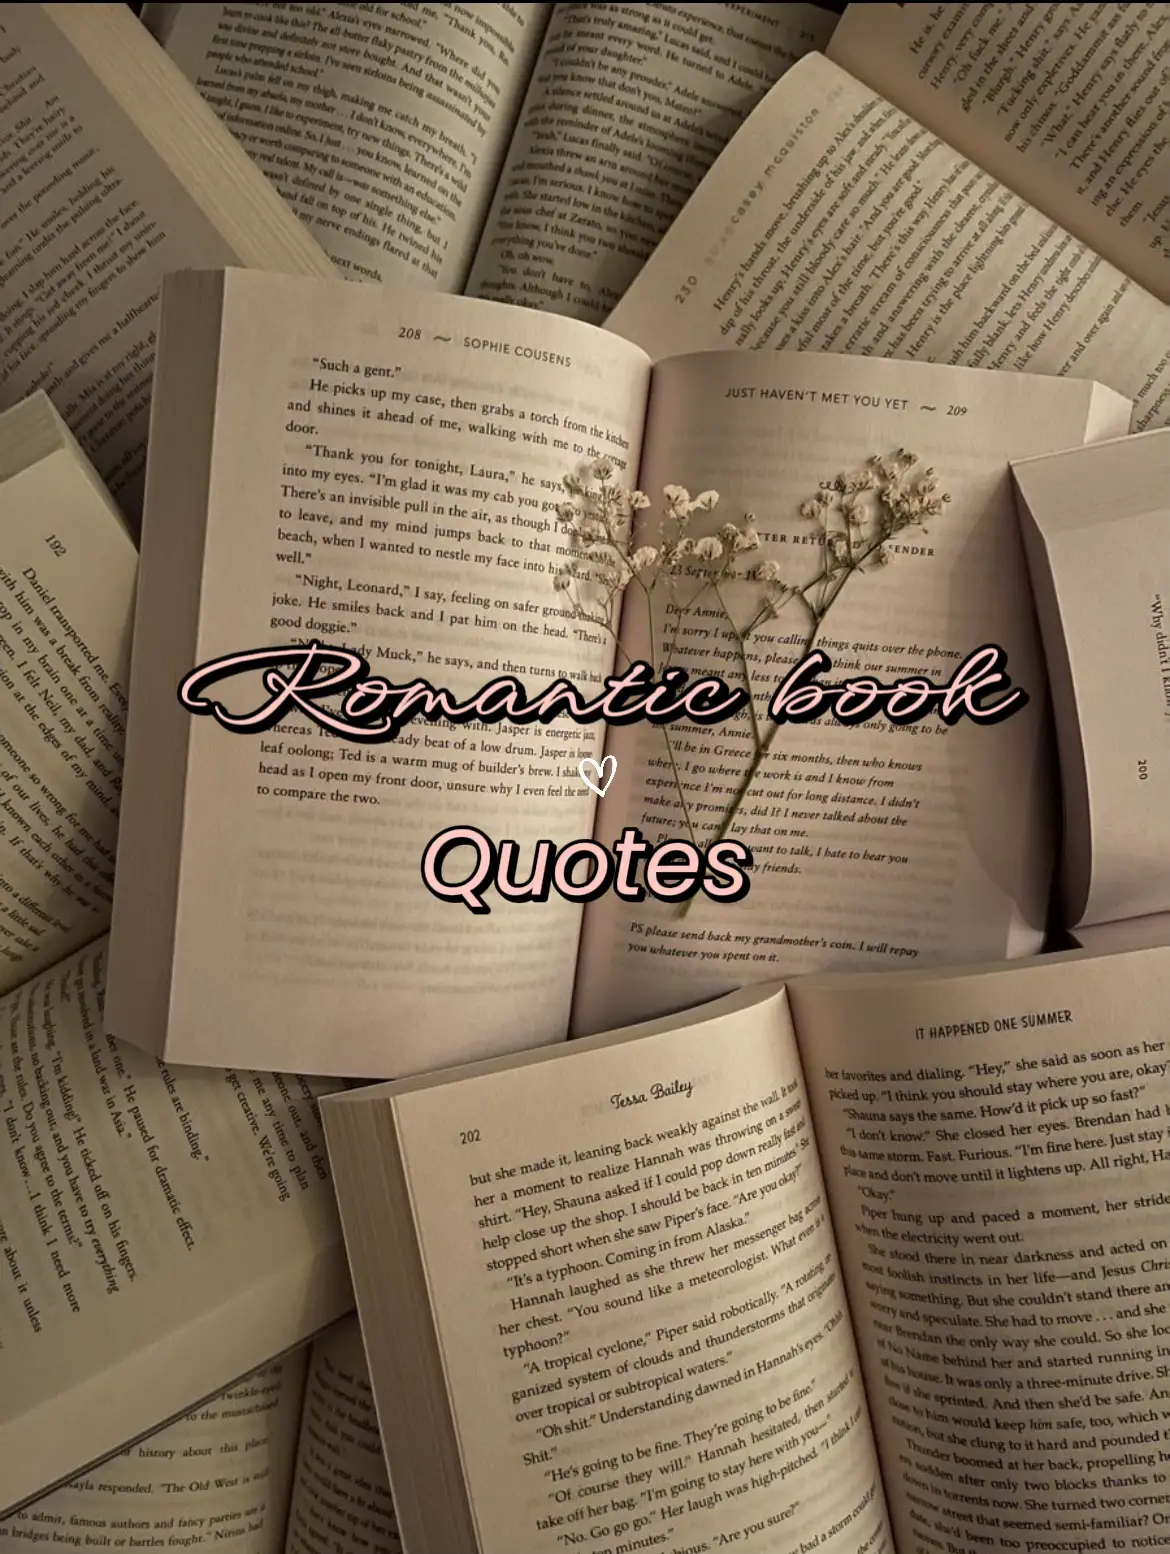 Twisted Games  Book boyfriends, Romance books quotes, Favorite book quotes